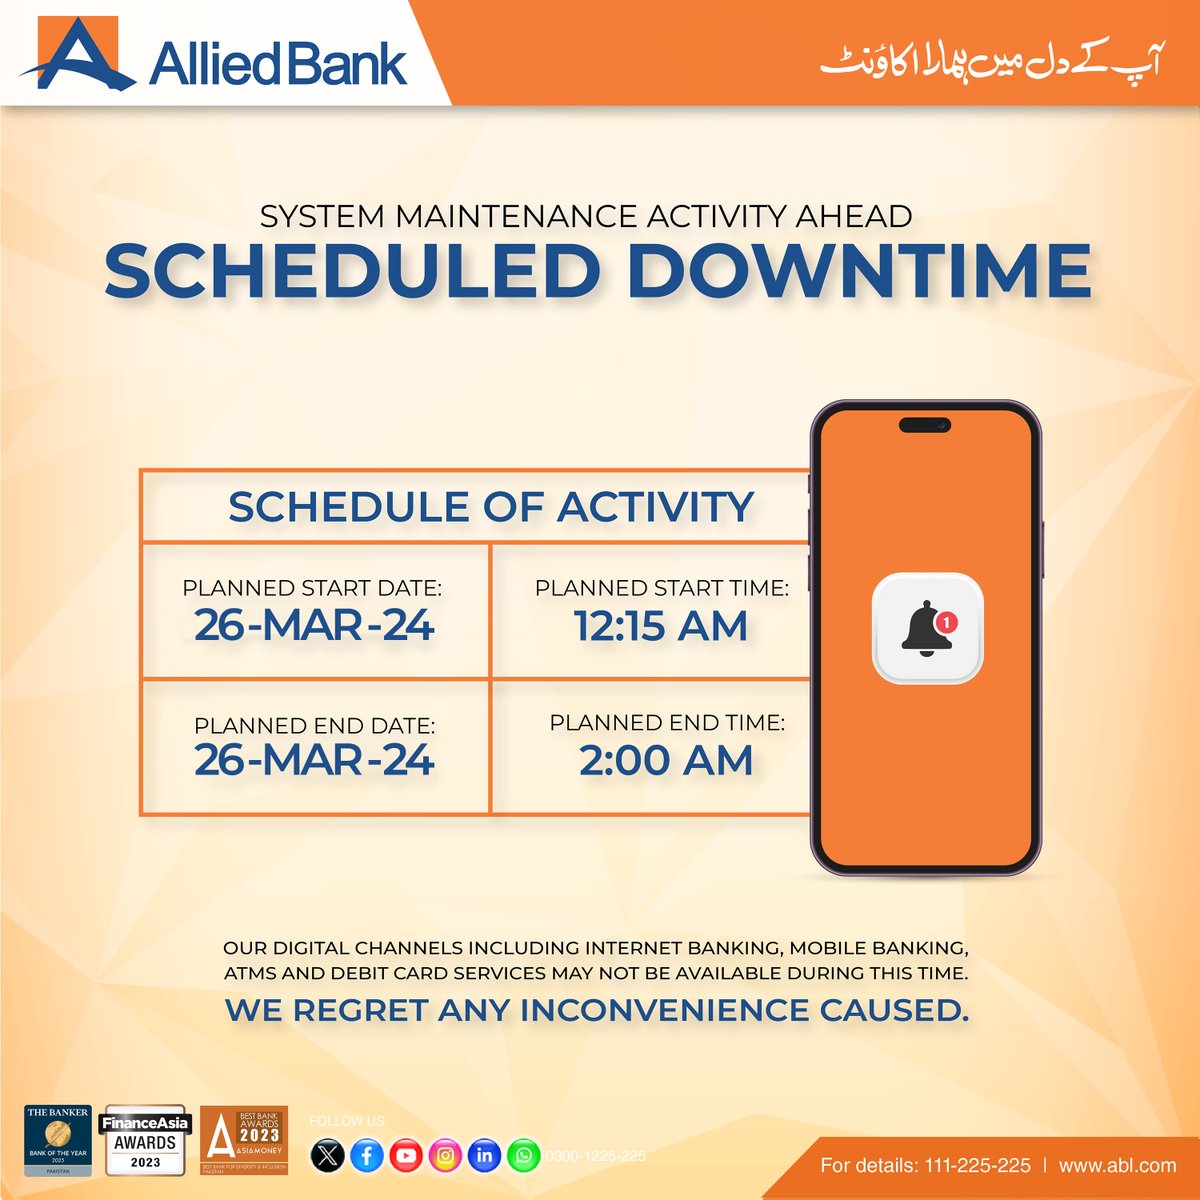 Dear Valued Customers our digital channels including Internet Banking, Mobile Banking, ATM's and Debit Card services may not be available during 12:15 AM till 2:00 AM on 26-Mar-24. We apologize for any inconvenience. 

#ABL #Maintenance #InternetBanking #Banking #Pakistan